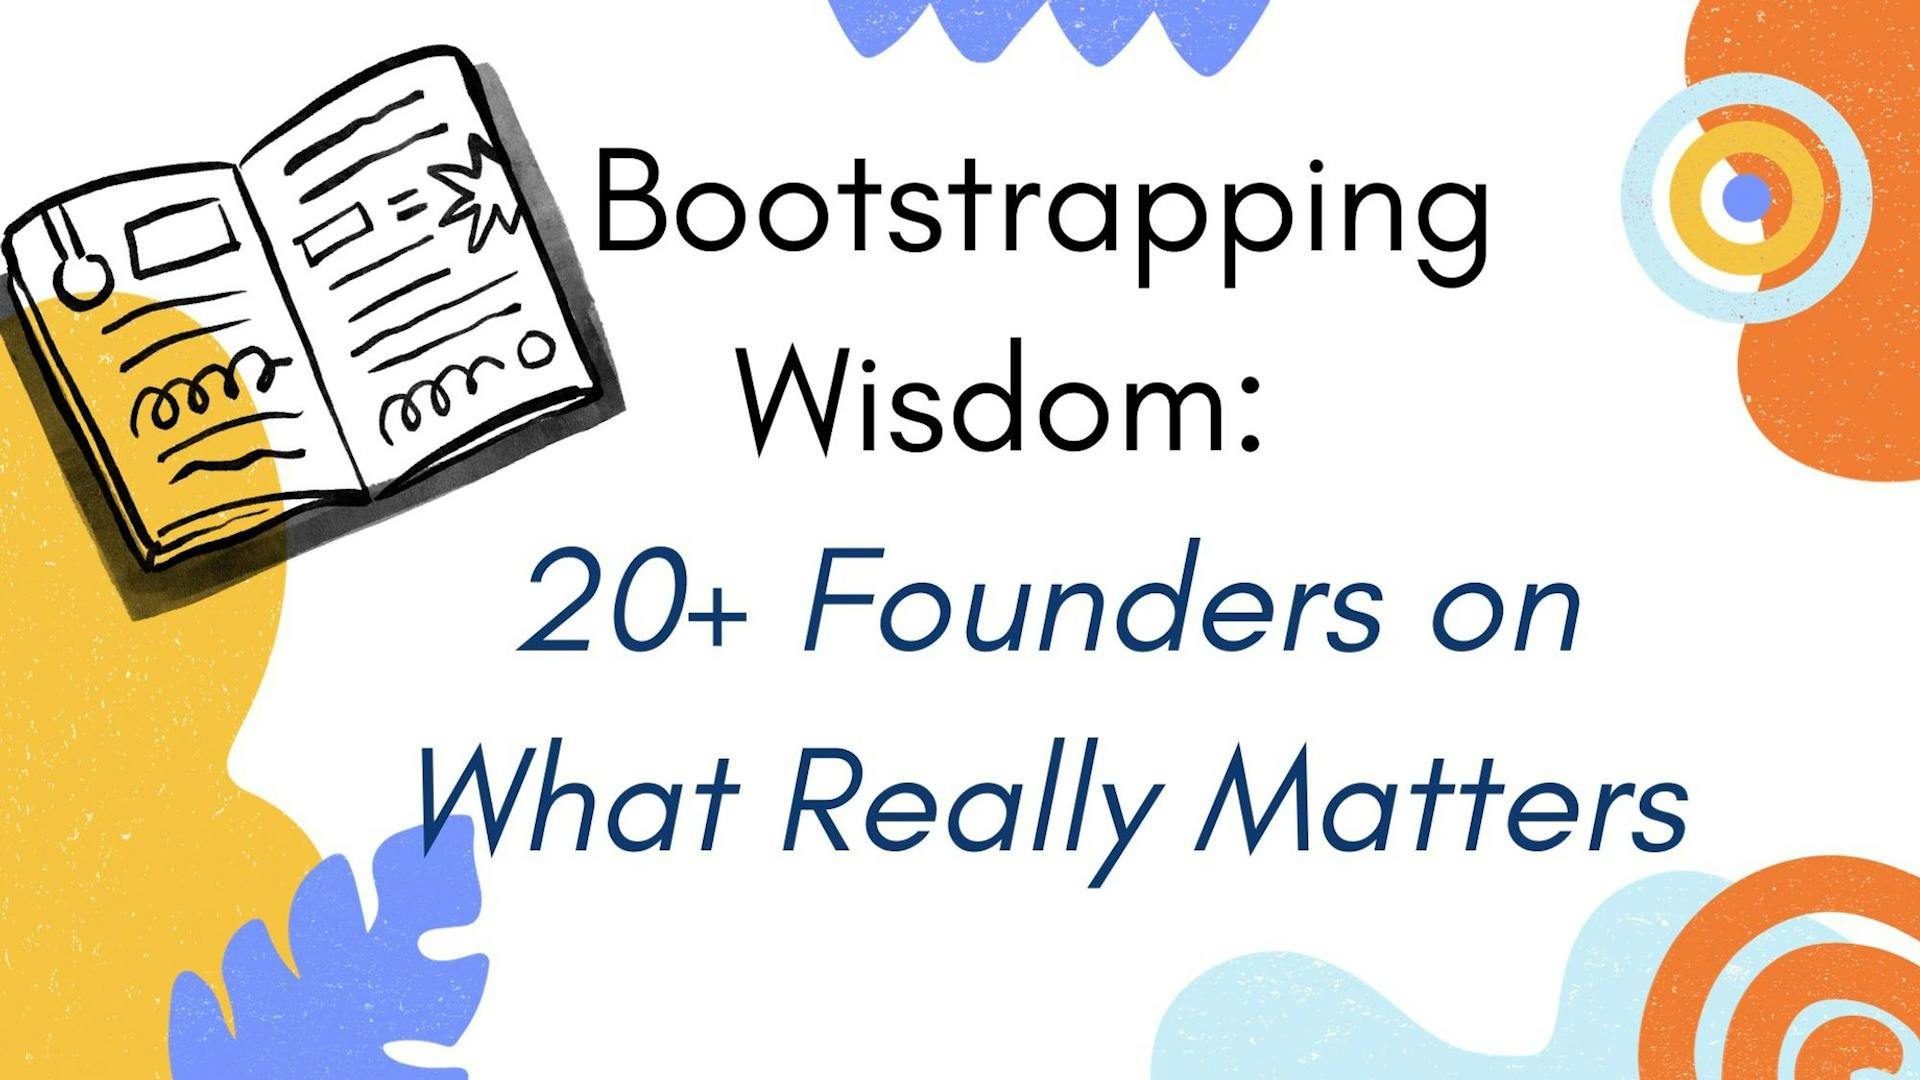 Cover Image for Bootstrapping Wisdom: 20+ Founders on What Really Matters